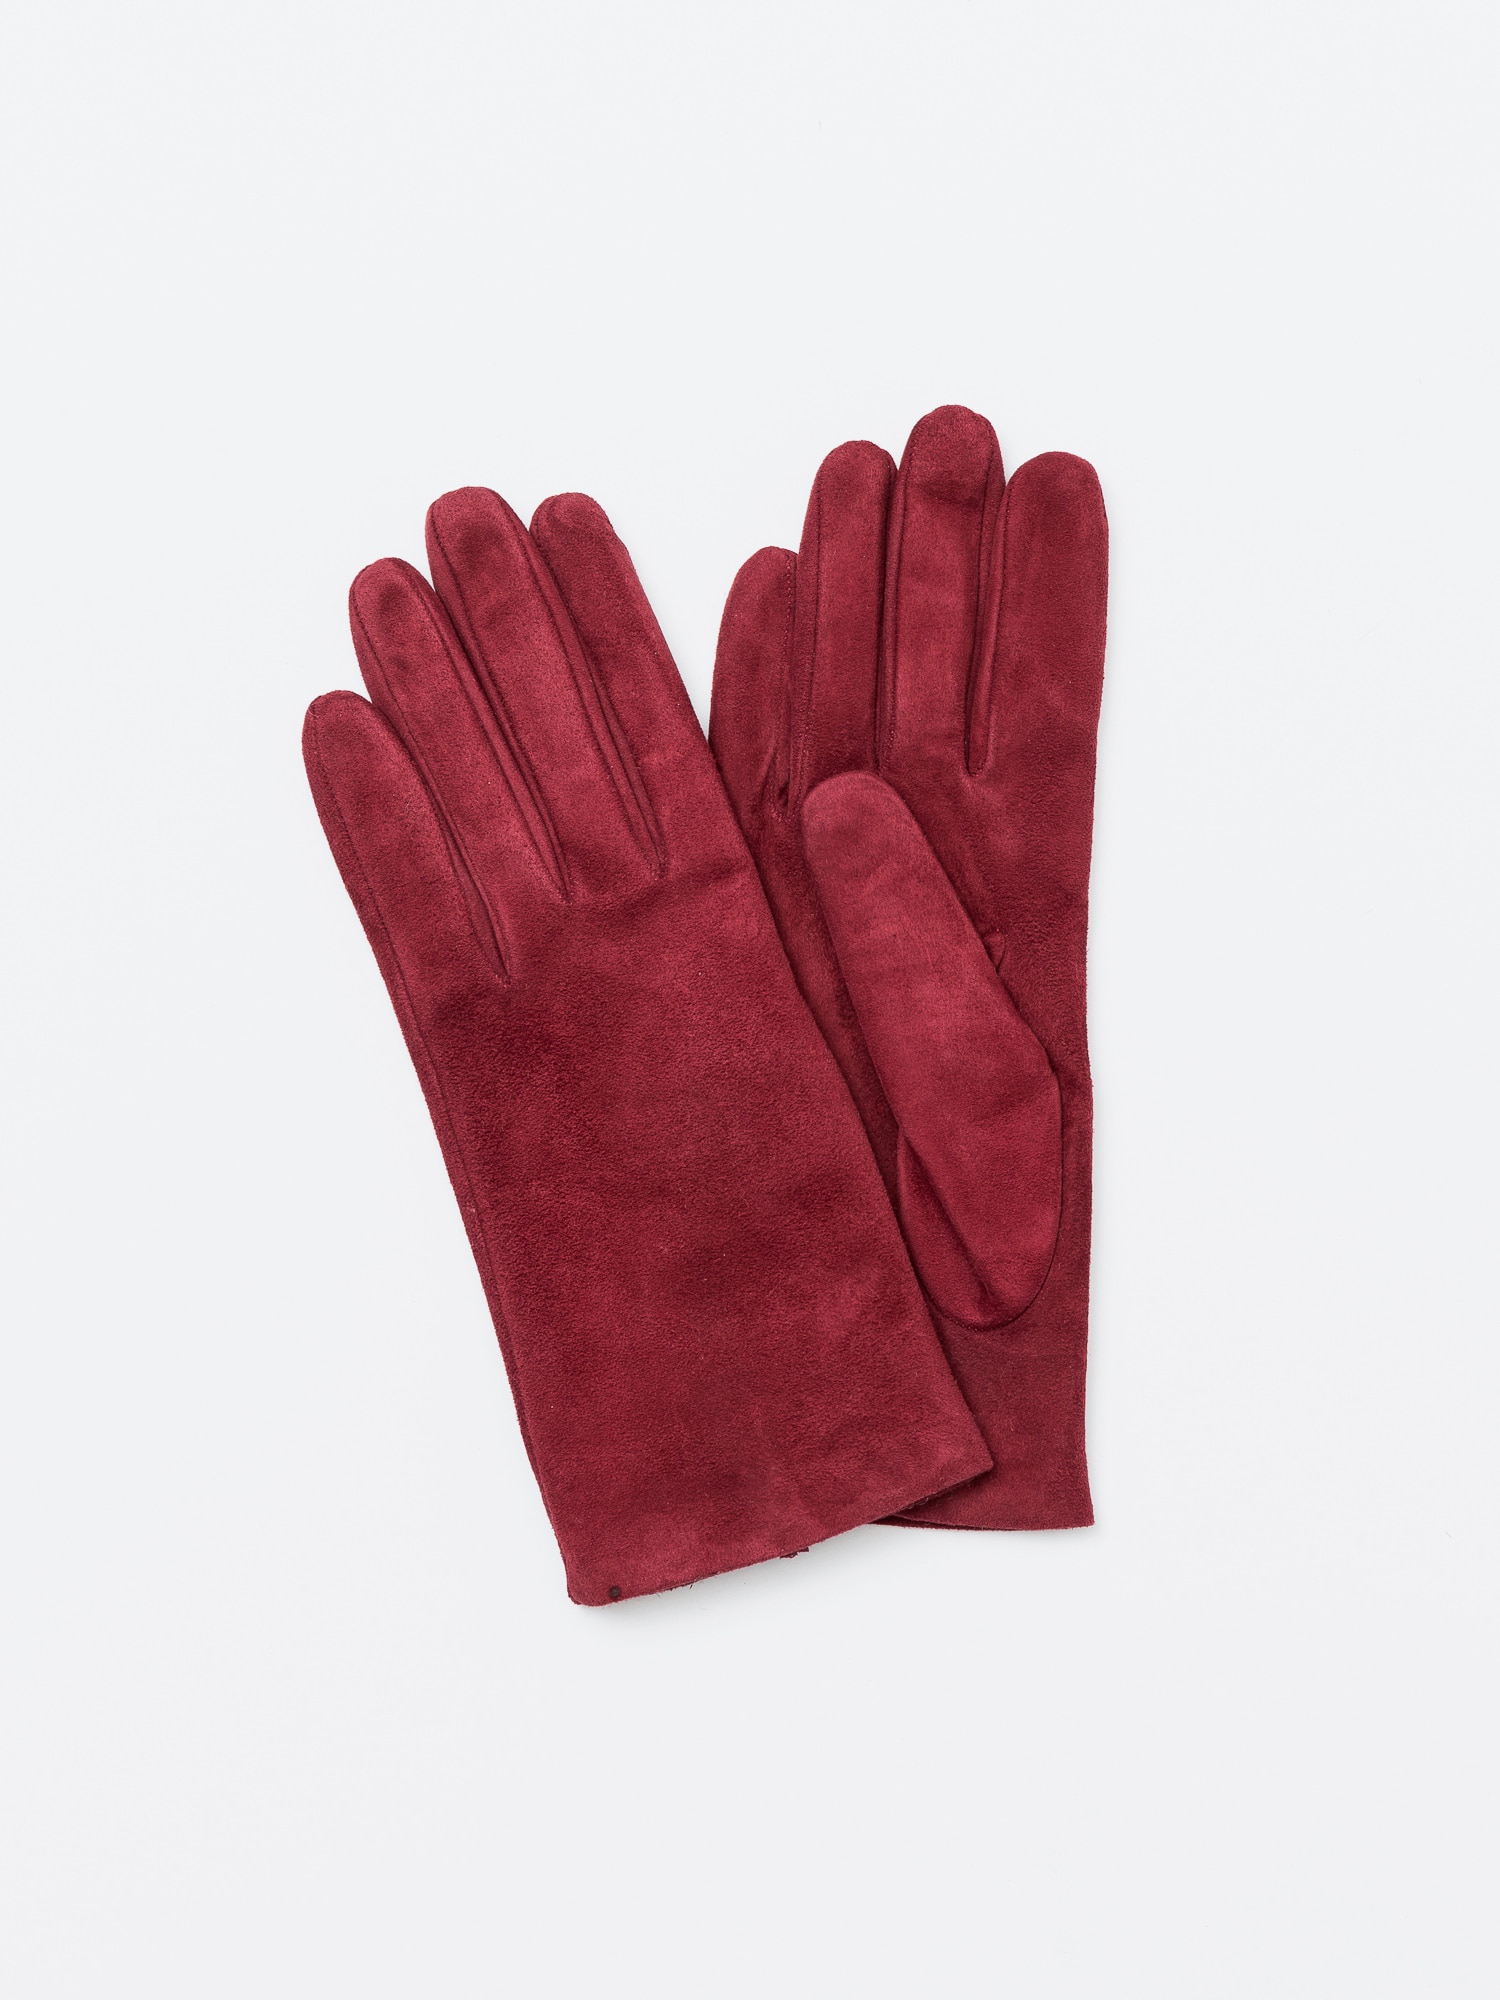 Omega gloves Nappa Bordeaux Suede (Woman)오메가글러브